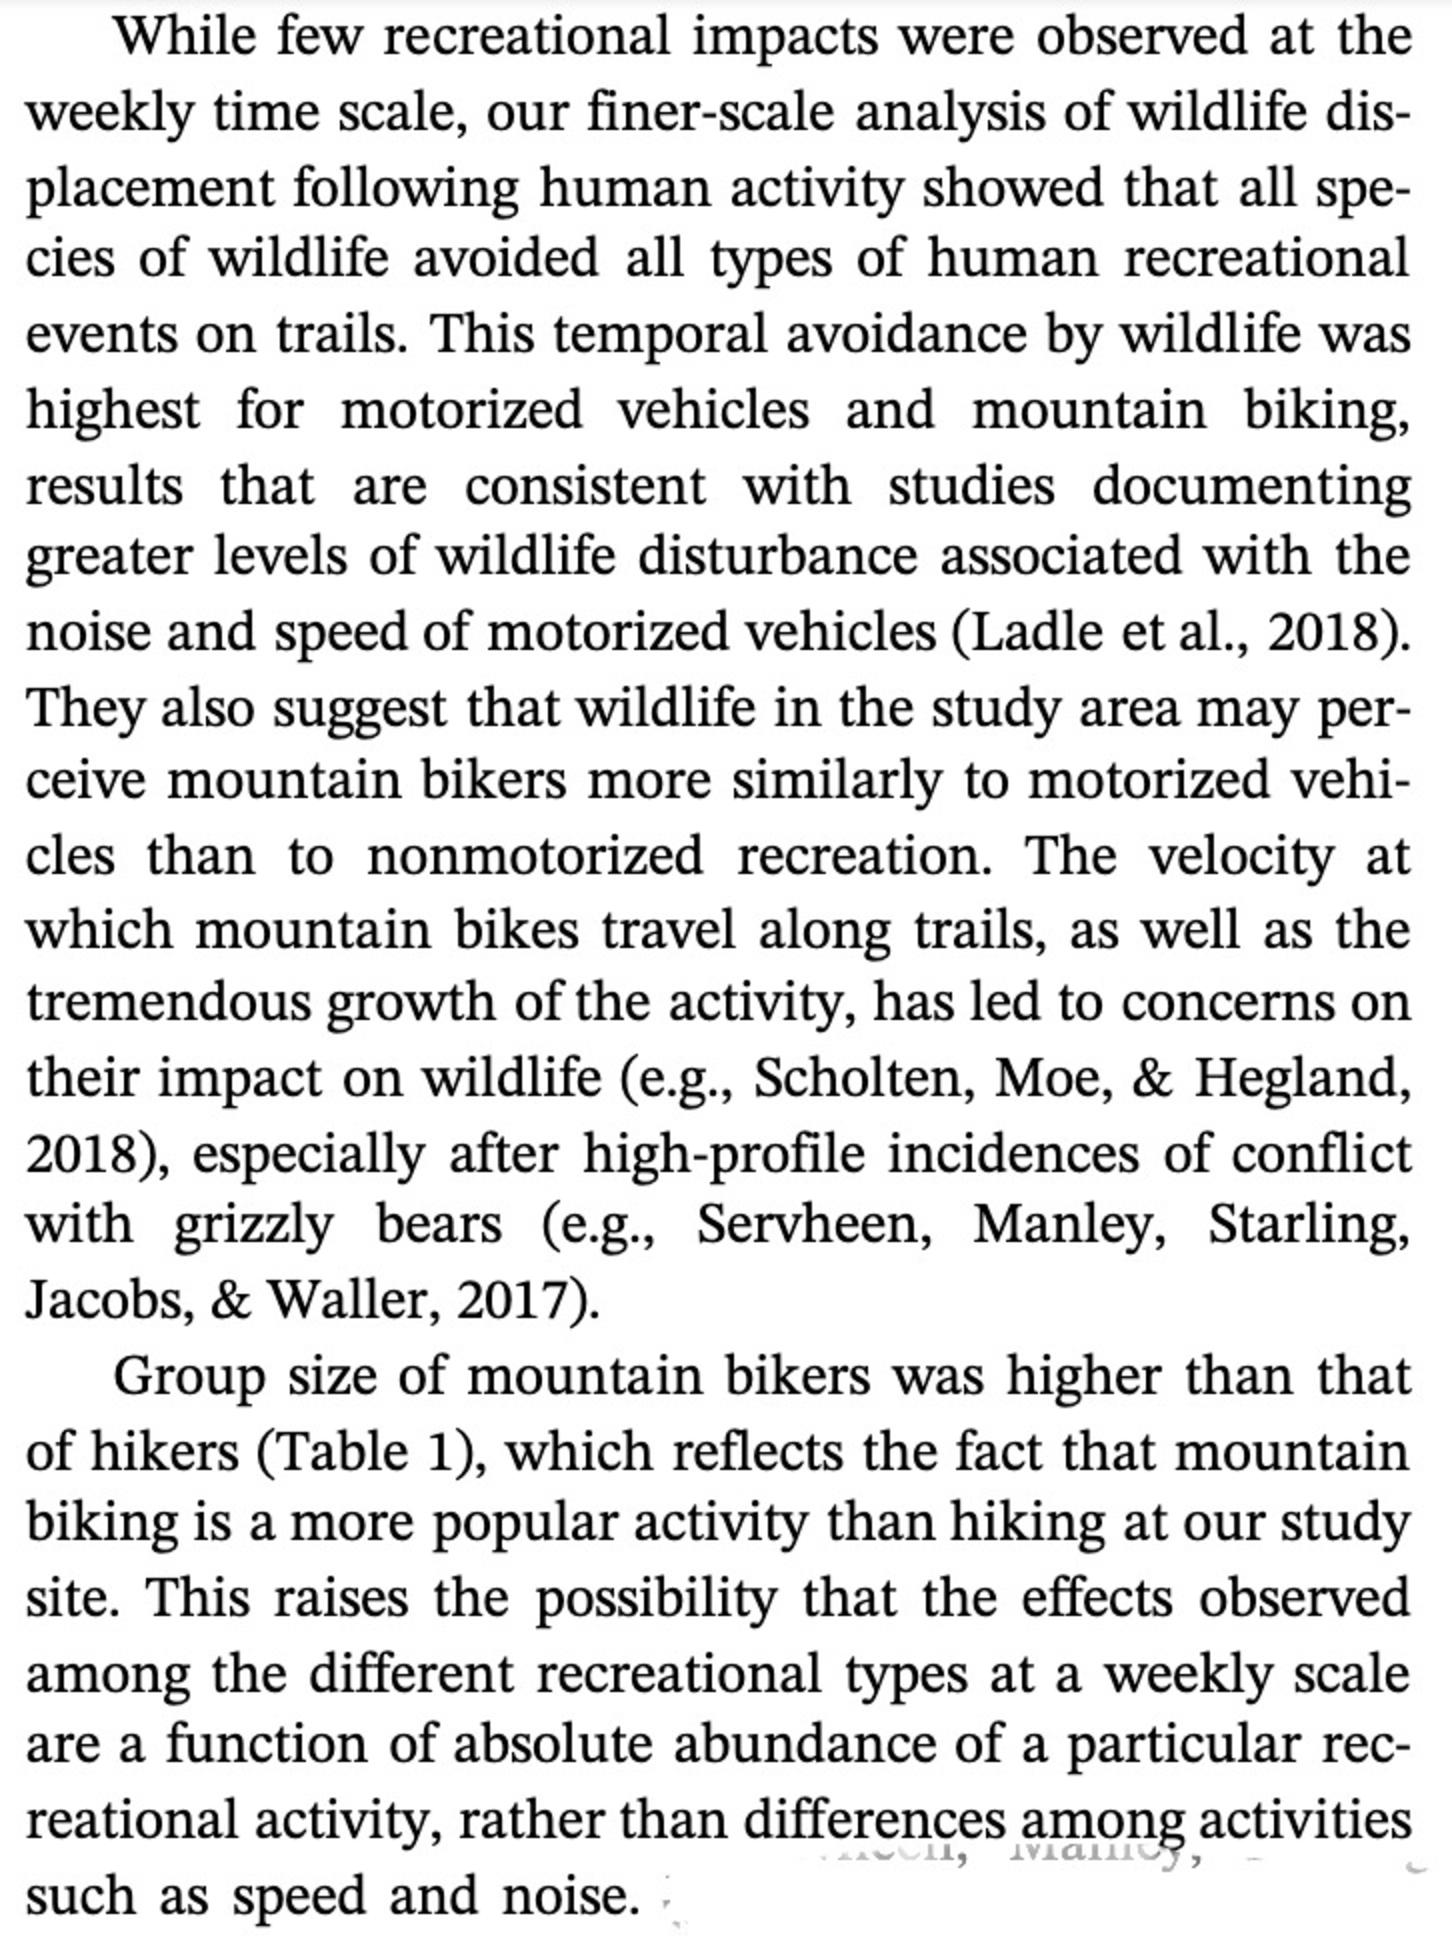 One reference point: A verbatim passage from a 2020 study in Canada titled "Relative effects of recreational activities on a temperate terrestrial wildlife assemblage."